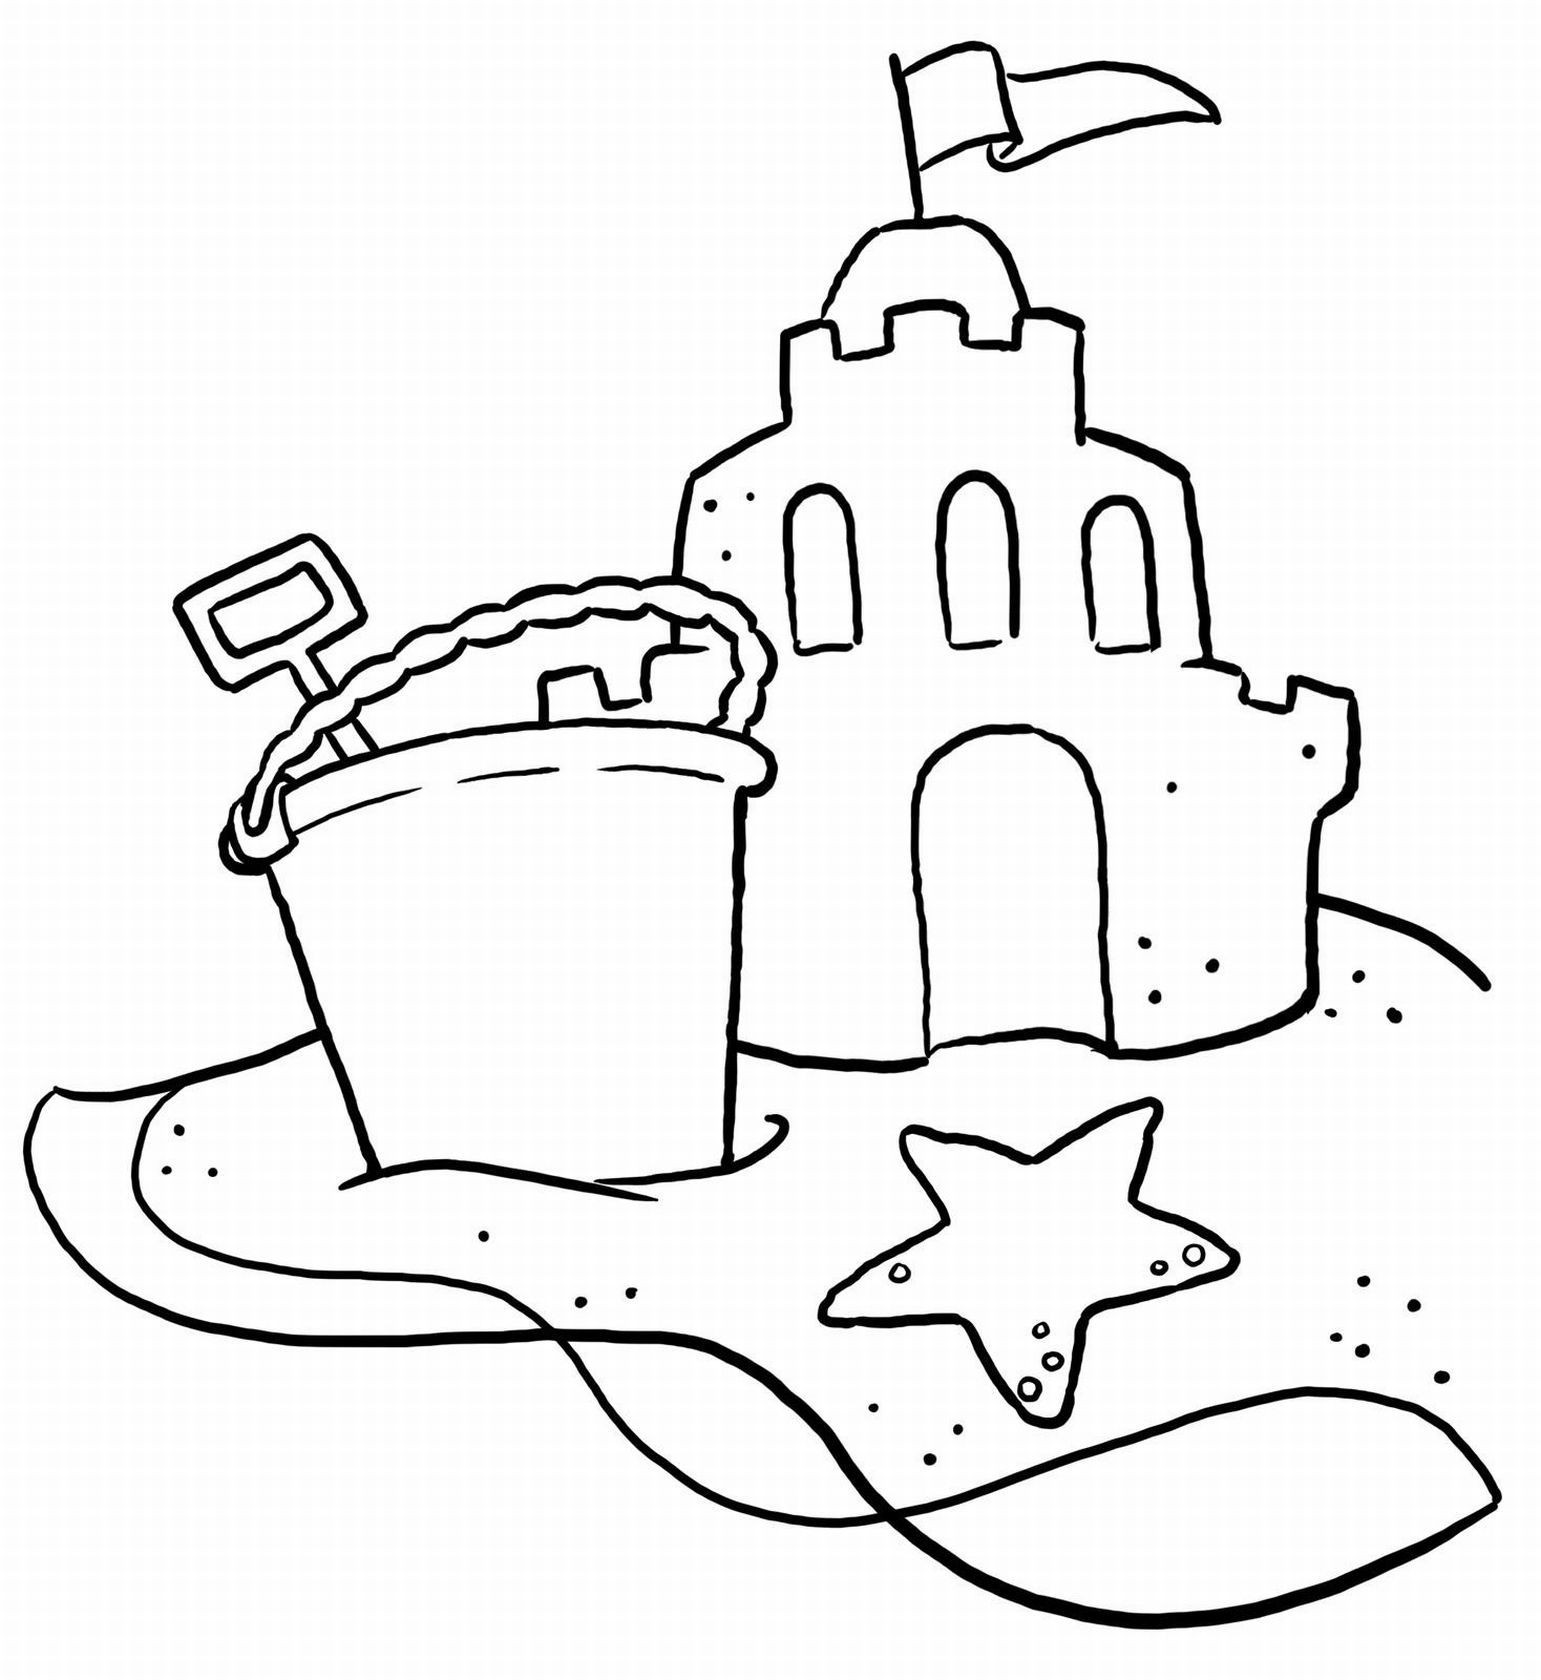 Beach Coloring Pages For Kids
 Beach Coloring Pages Beach Scenes & Activities